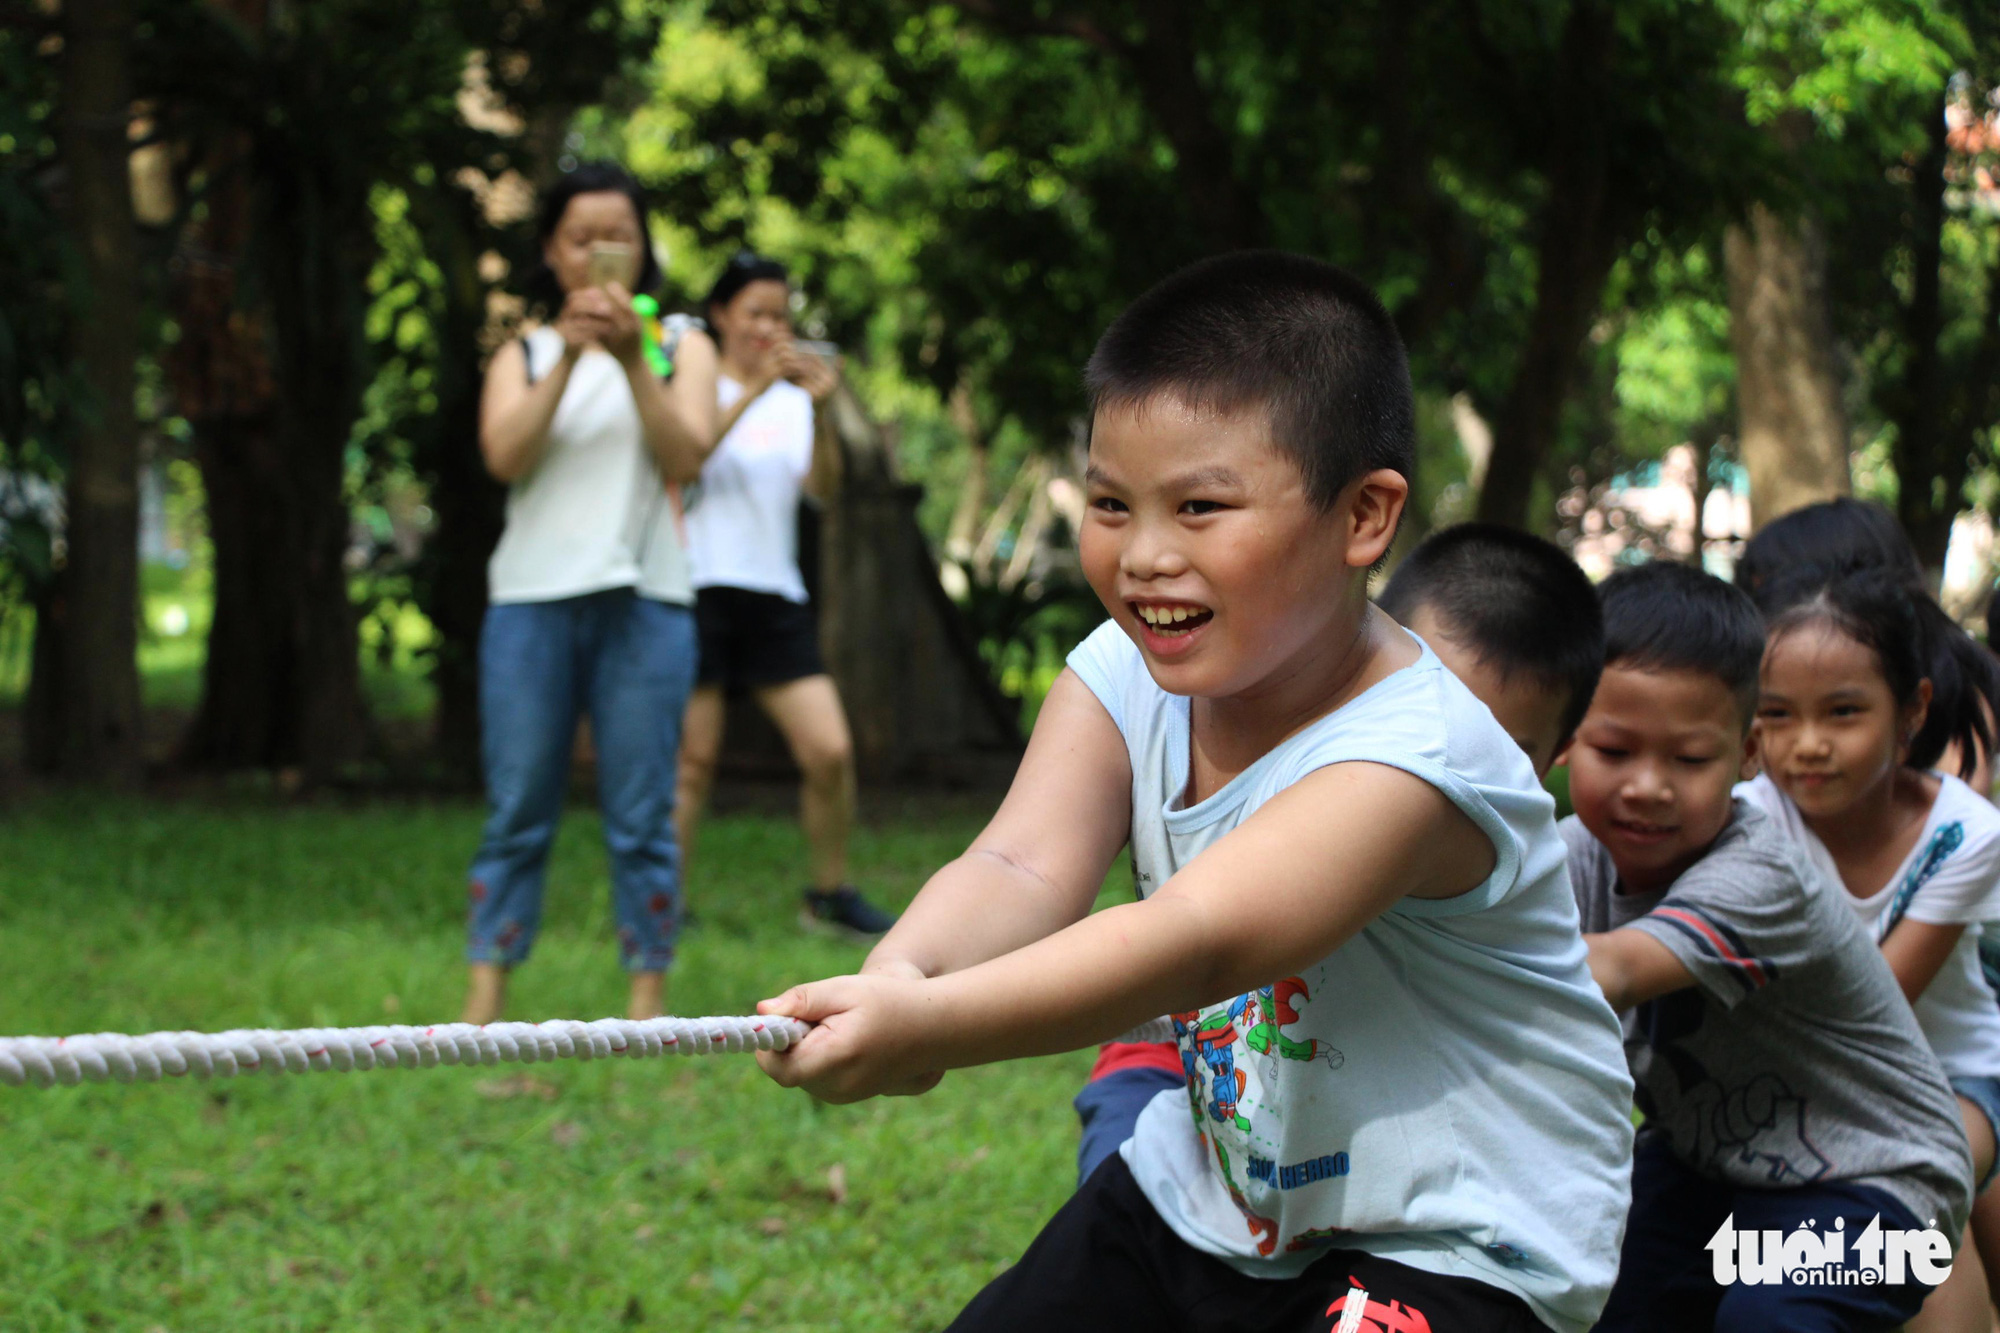 Children play a game of tug of war at the ‘Kingdom of Recycled Materials’ event in Hanoi, Vietnam, May 31, 2020. Photo: Ha Thanh / Tuoi Tre